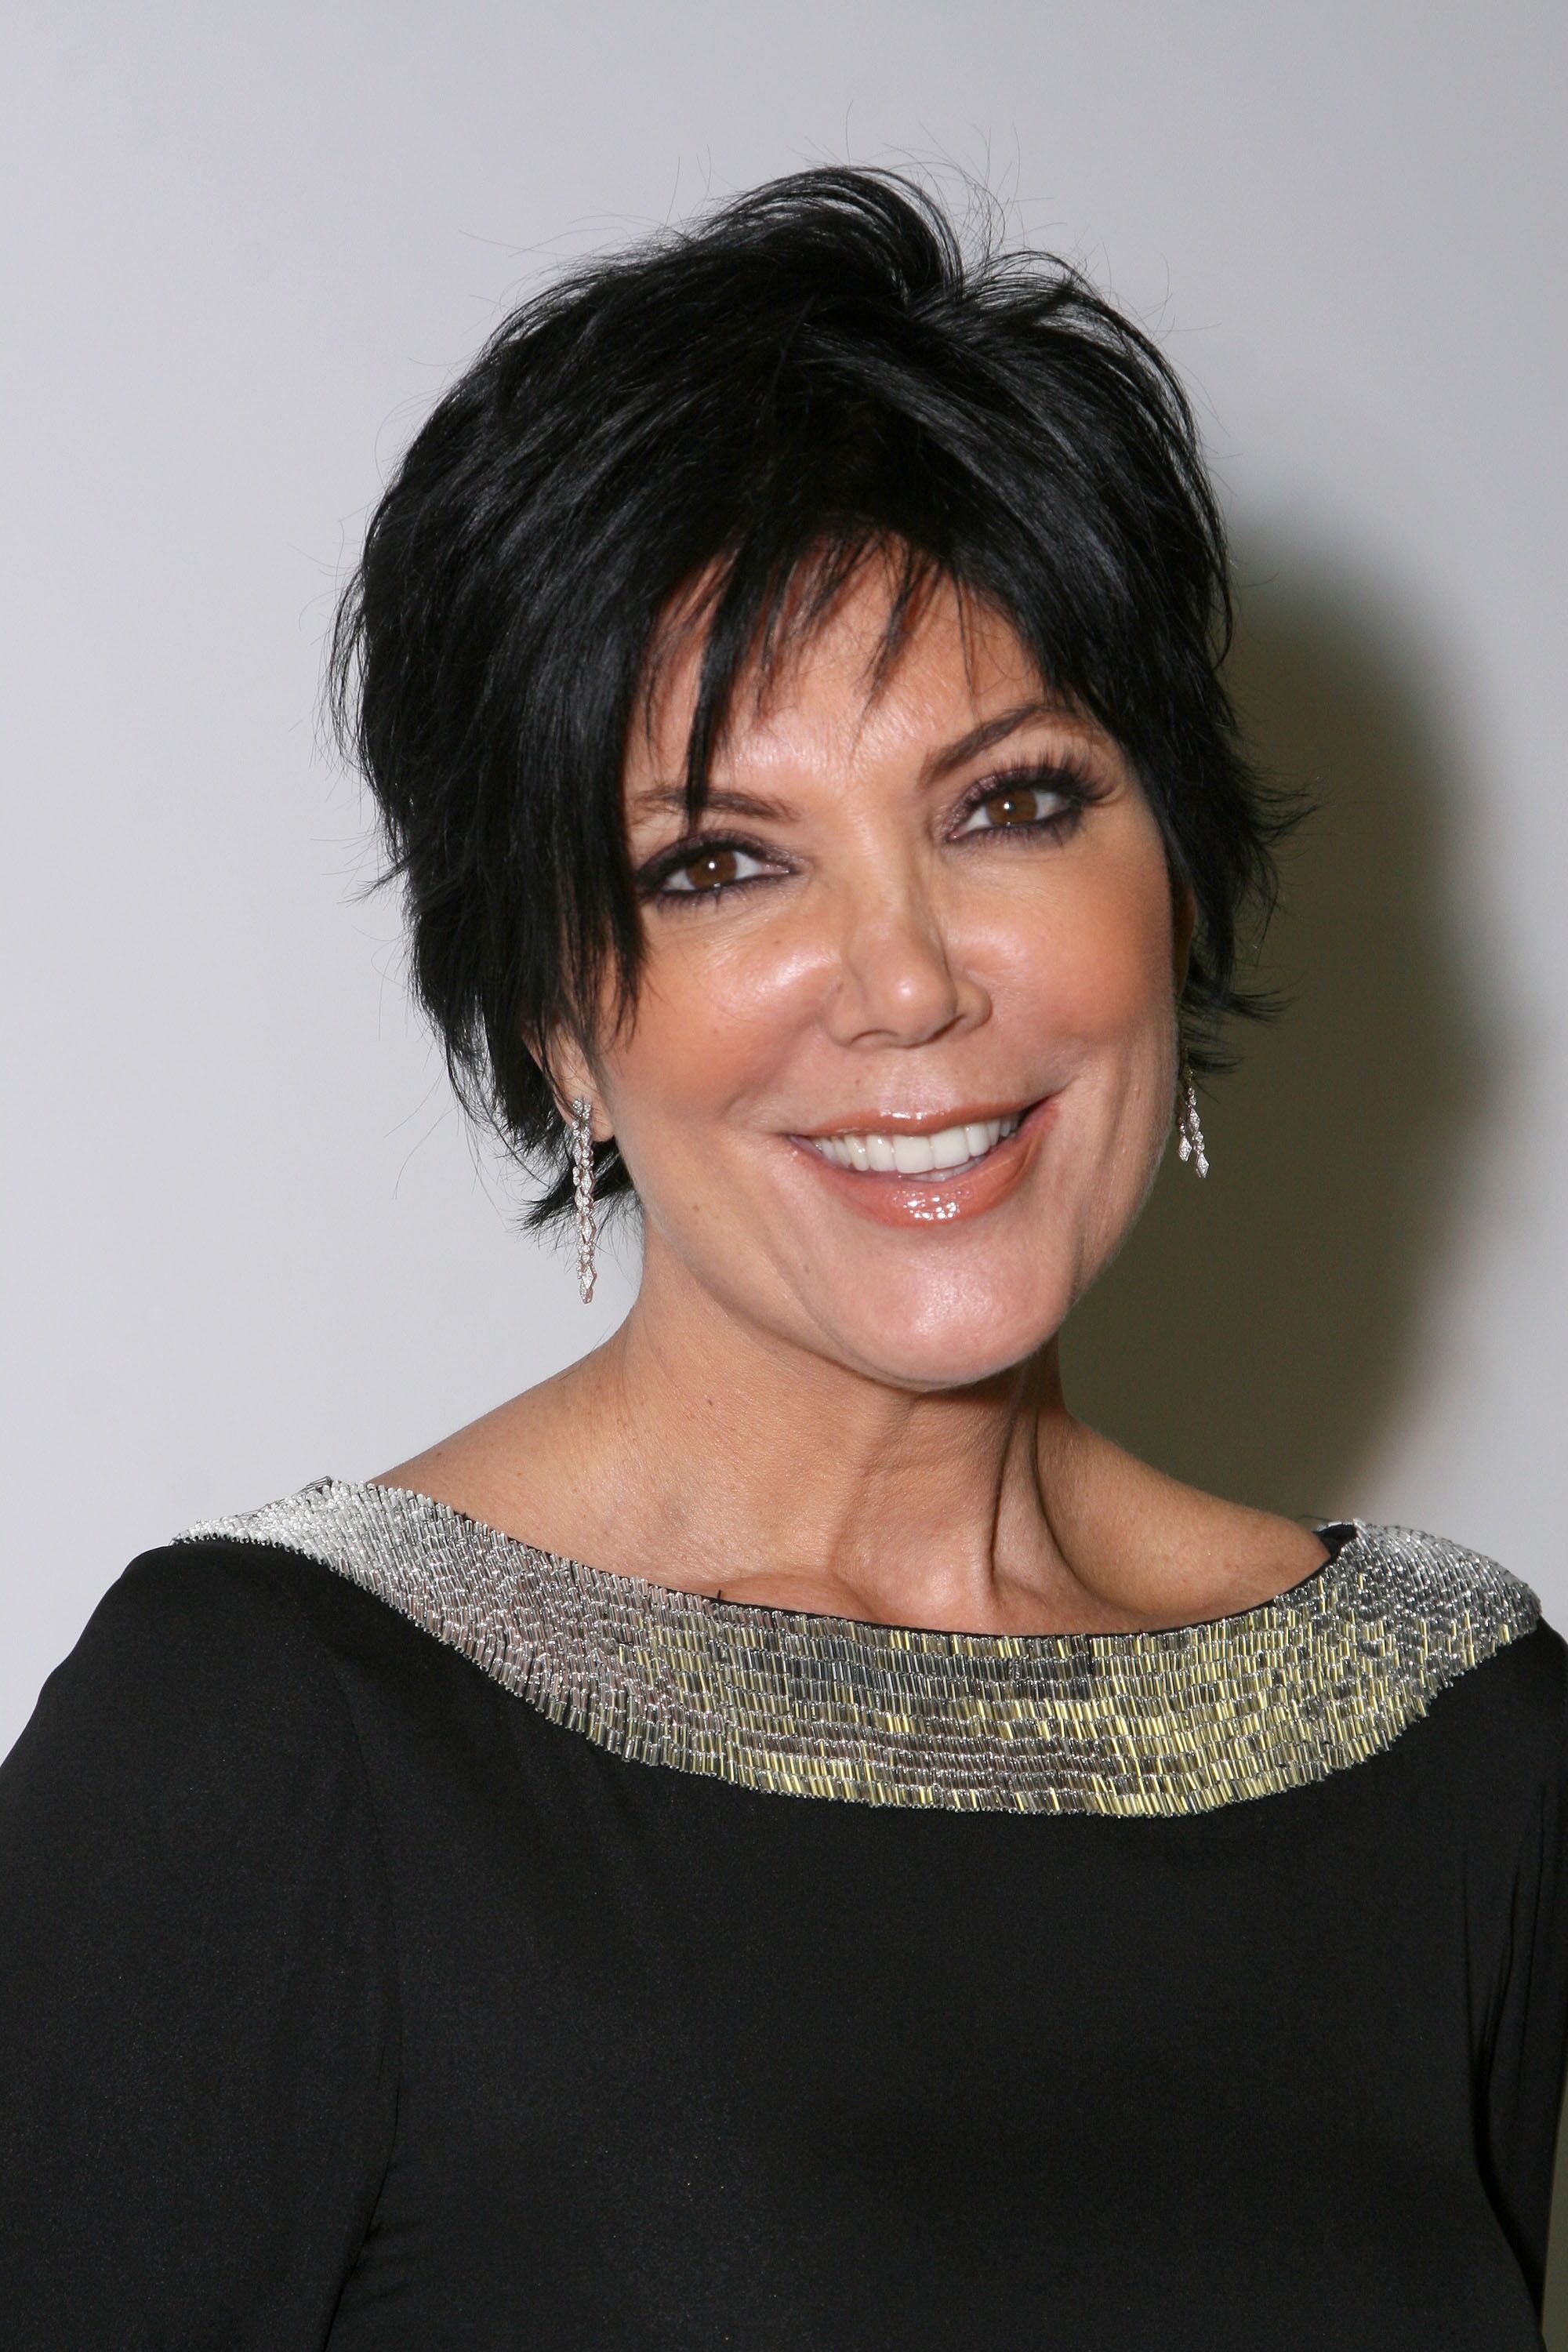  Kris Jenner arrives at the premiere of  "Keeping up with the Kardashians" on October 9,2007. | Source: Getty Images